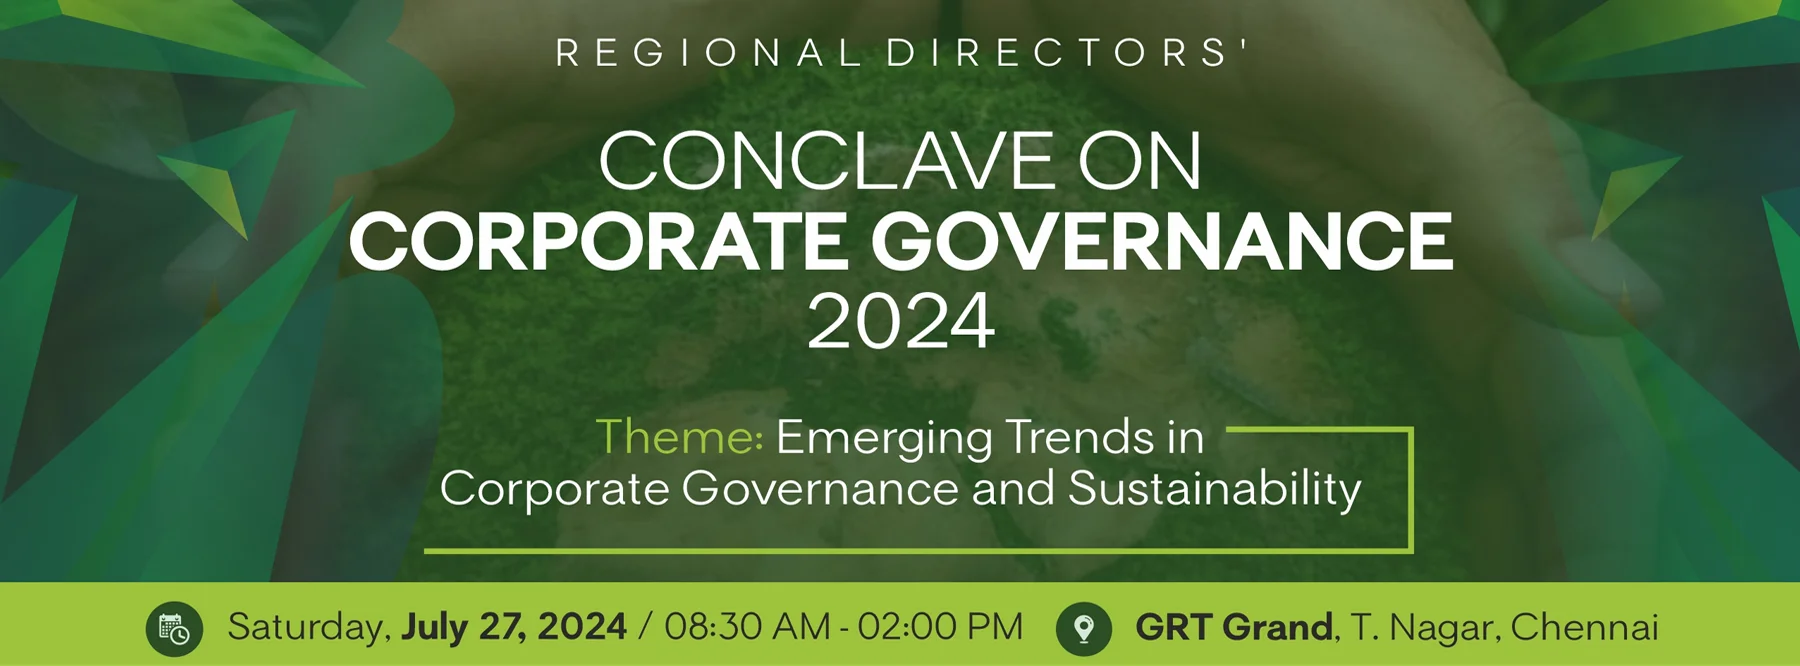 Regional Directors’ Conclave on Corporate Governance